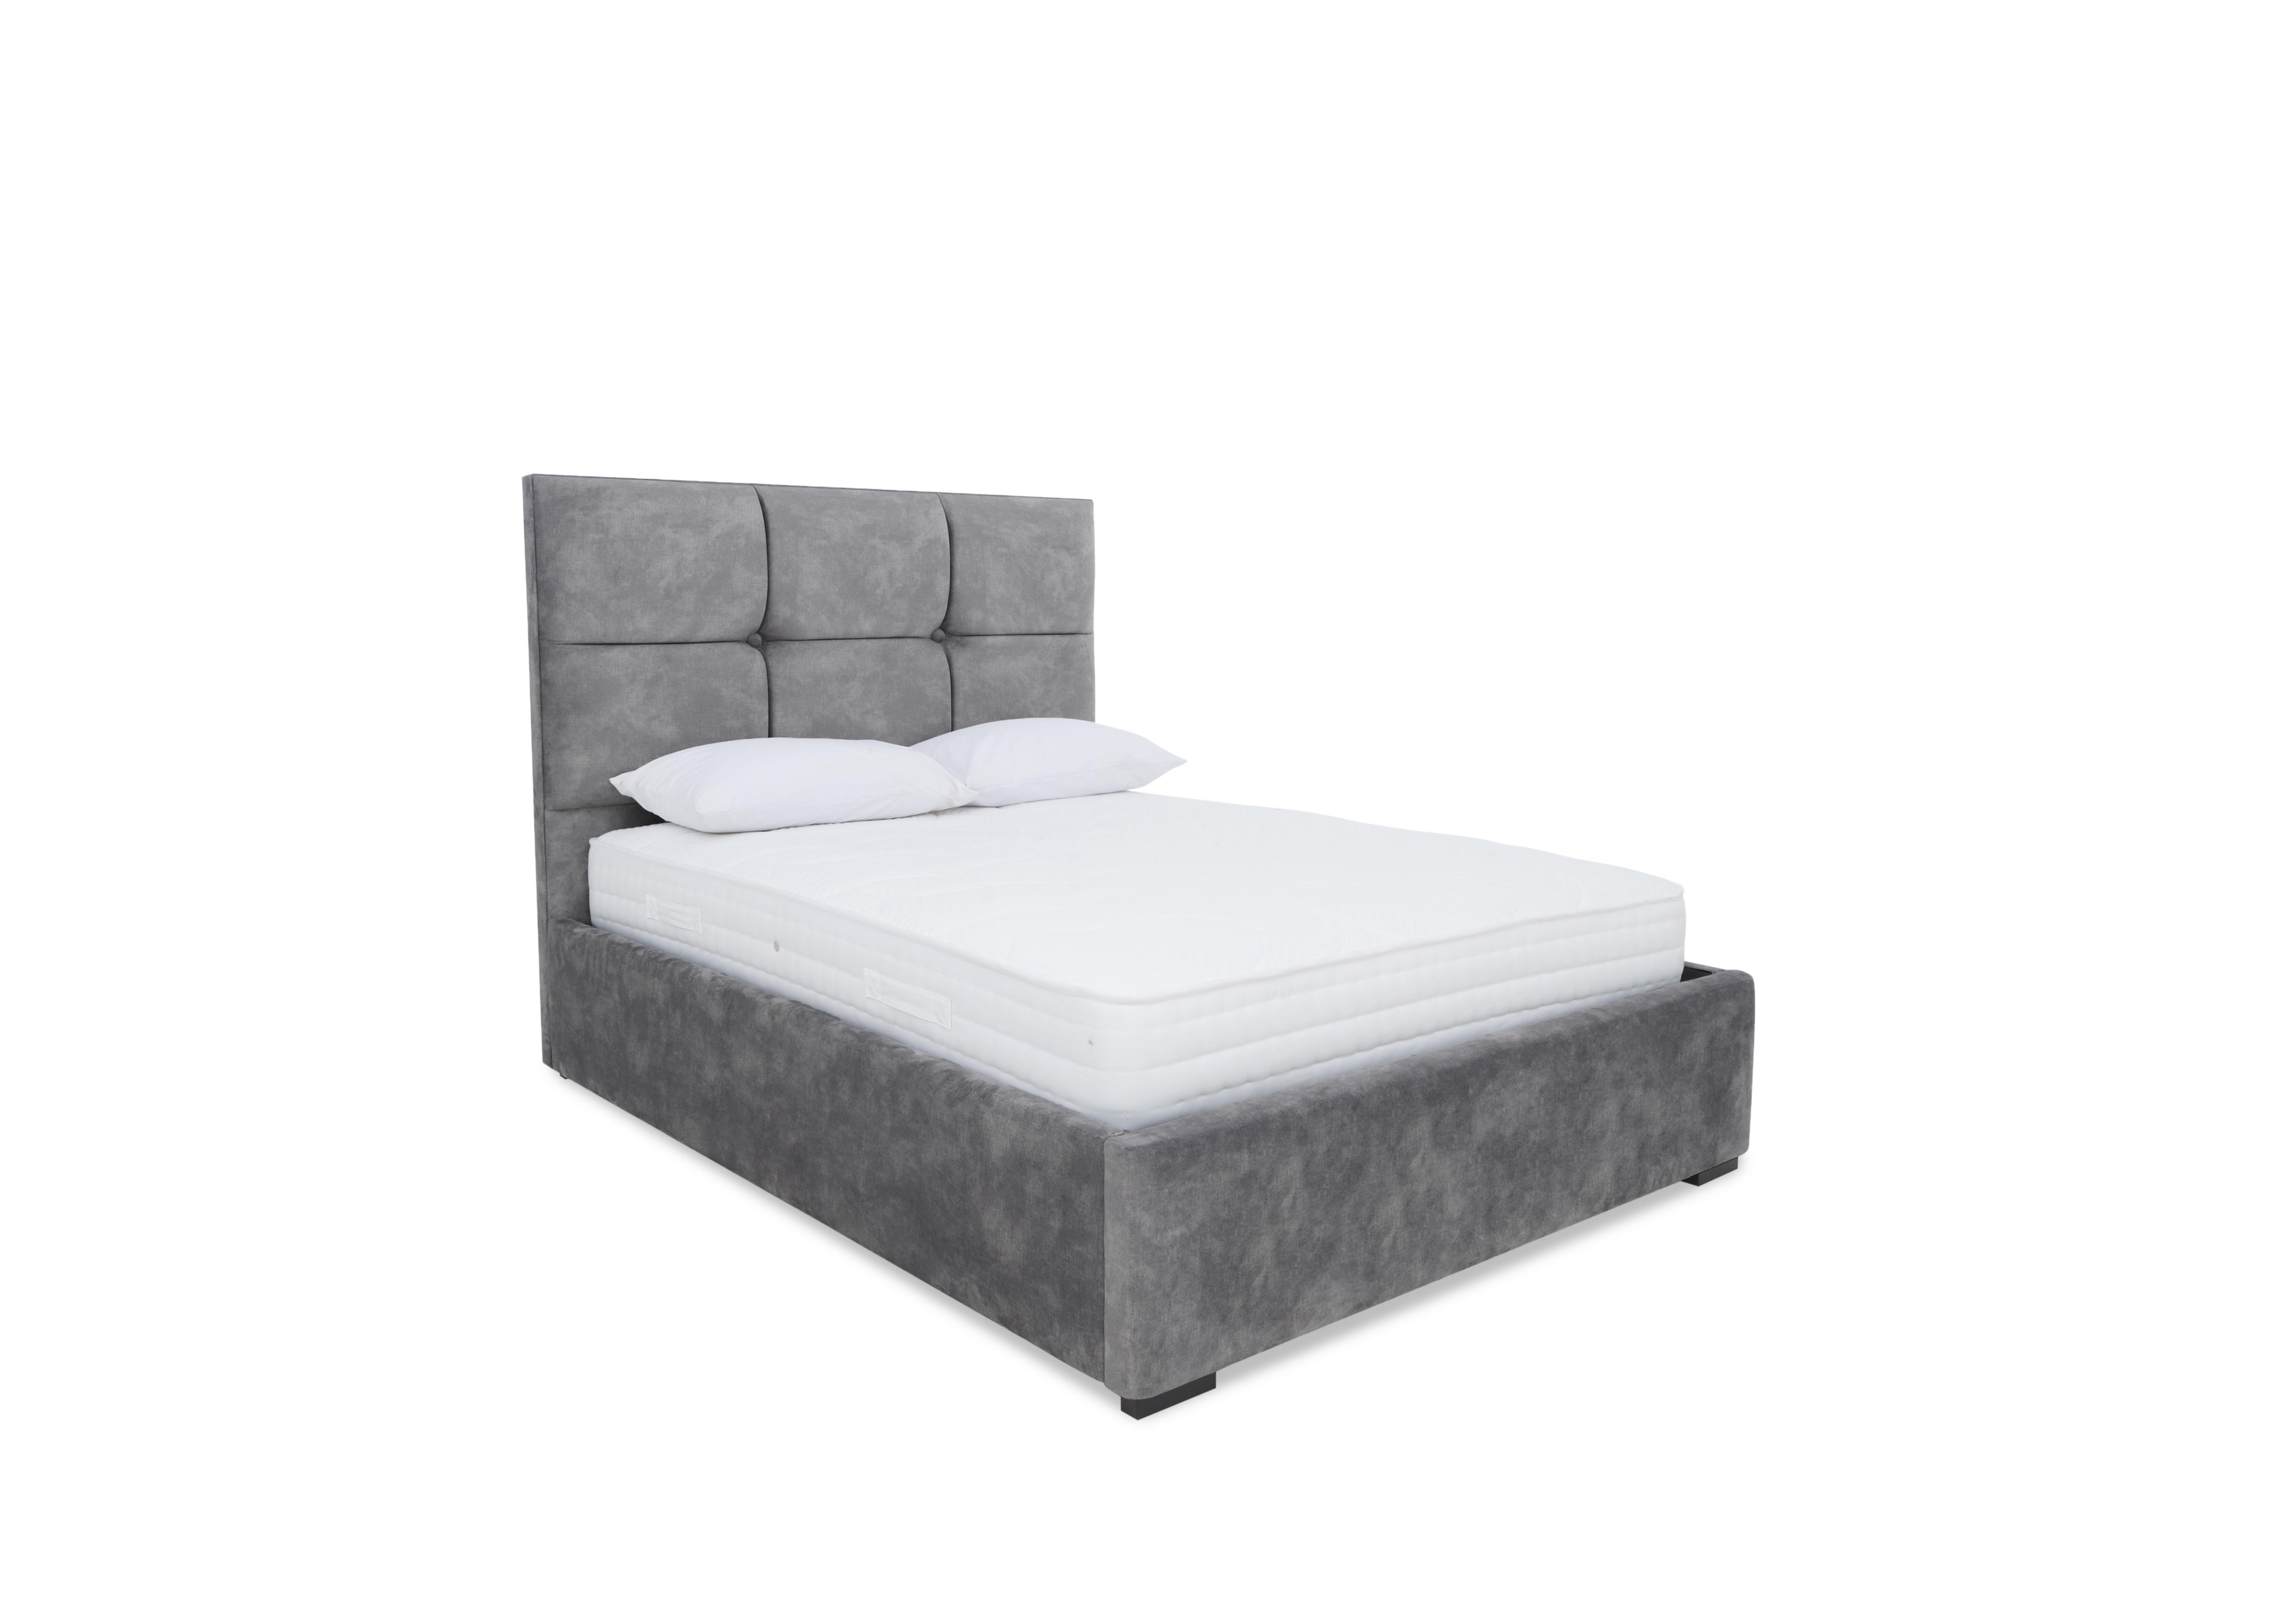 Rubix Electric Ottoman Bed Frame in Lace Dolphin on Furniture Village